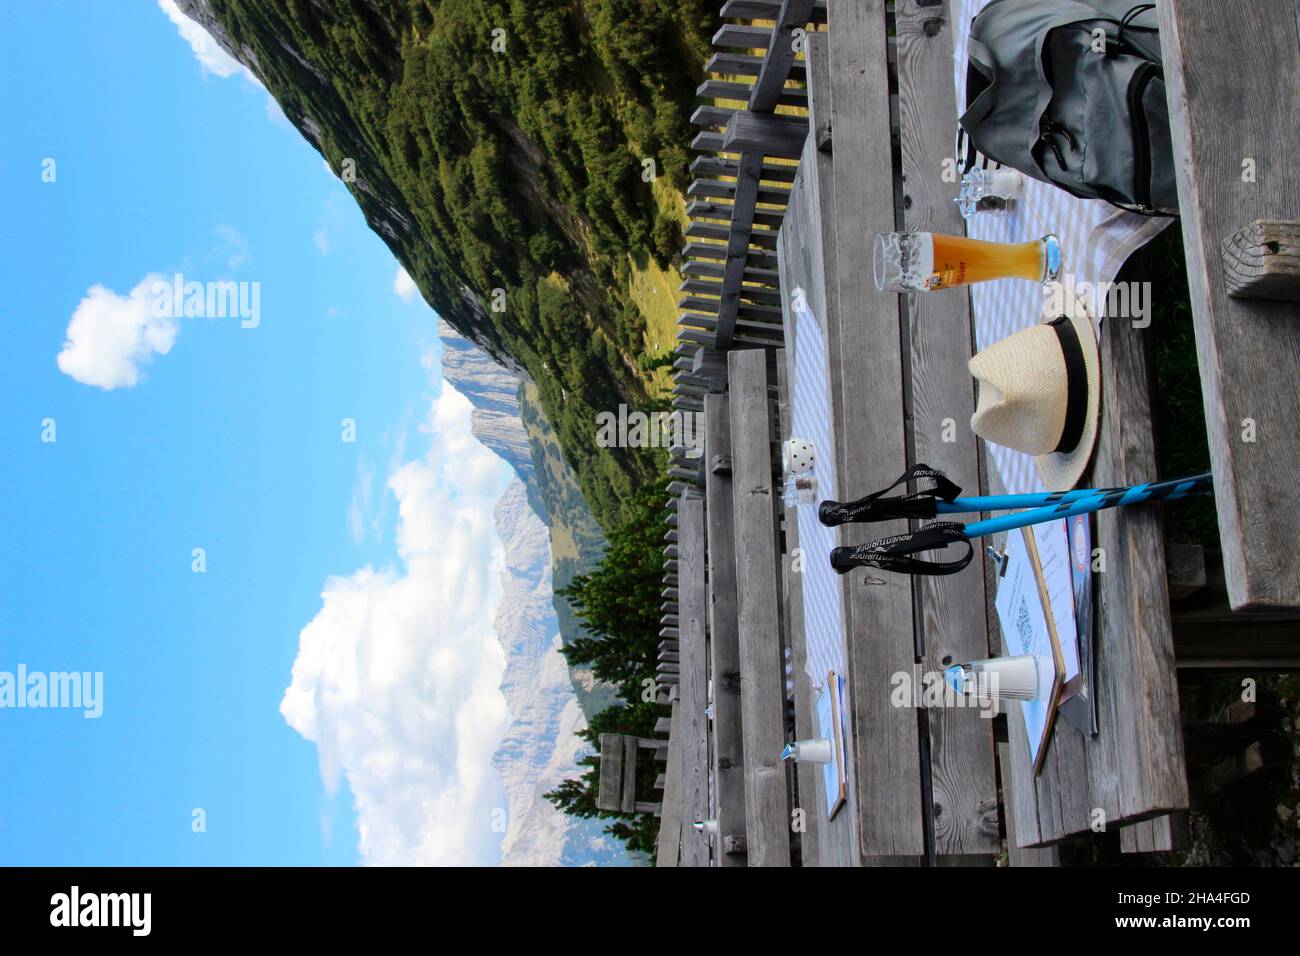 hike with a break on the terrace of the solsteinhaus (1806m) of the innsbruck austrian alpine club section,table with sun hat,wheat beer,hiking sticks,austria,tyrol,zirl Stock Photo